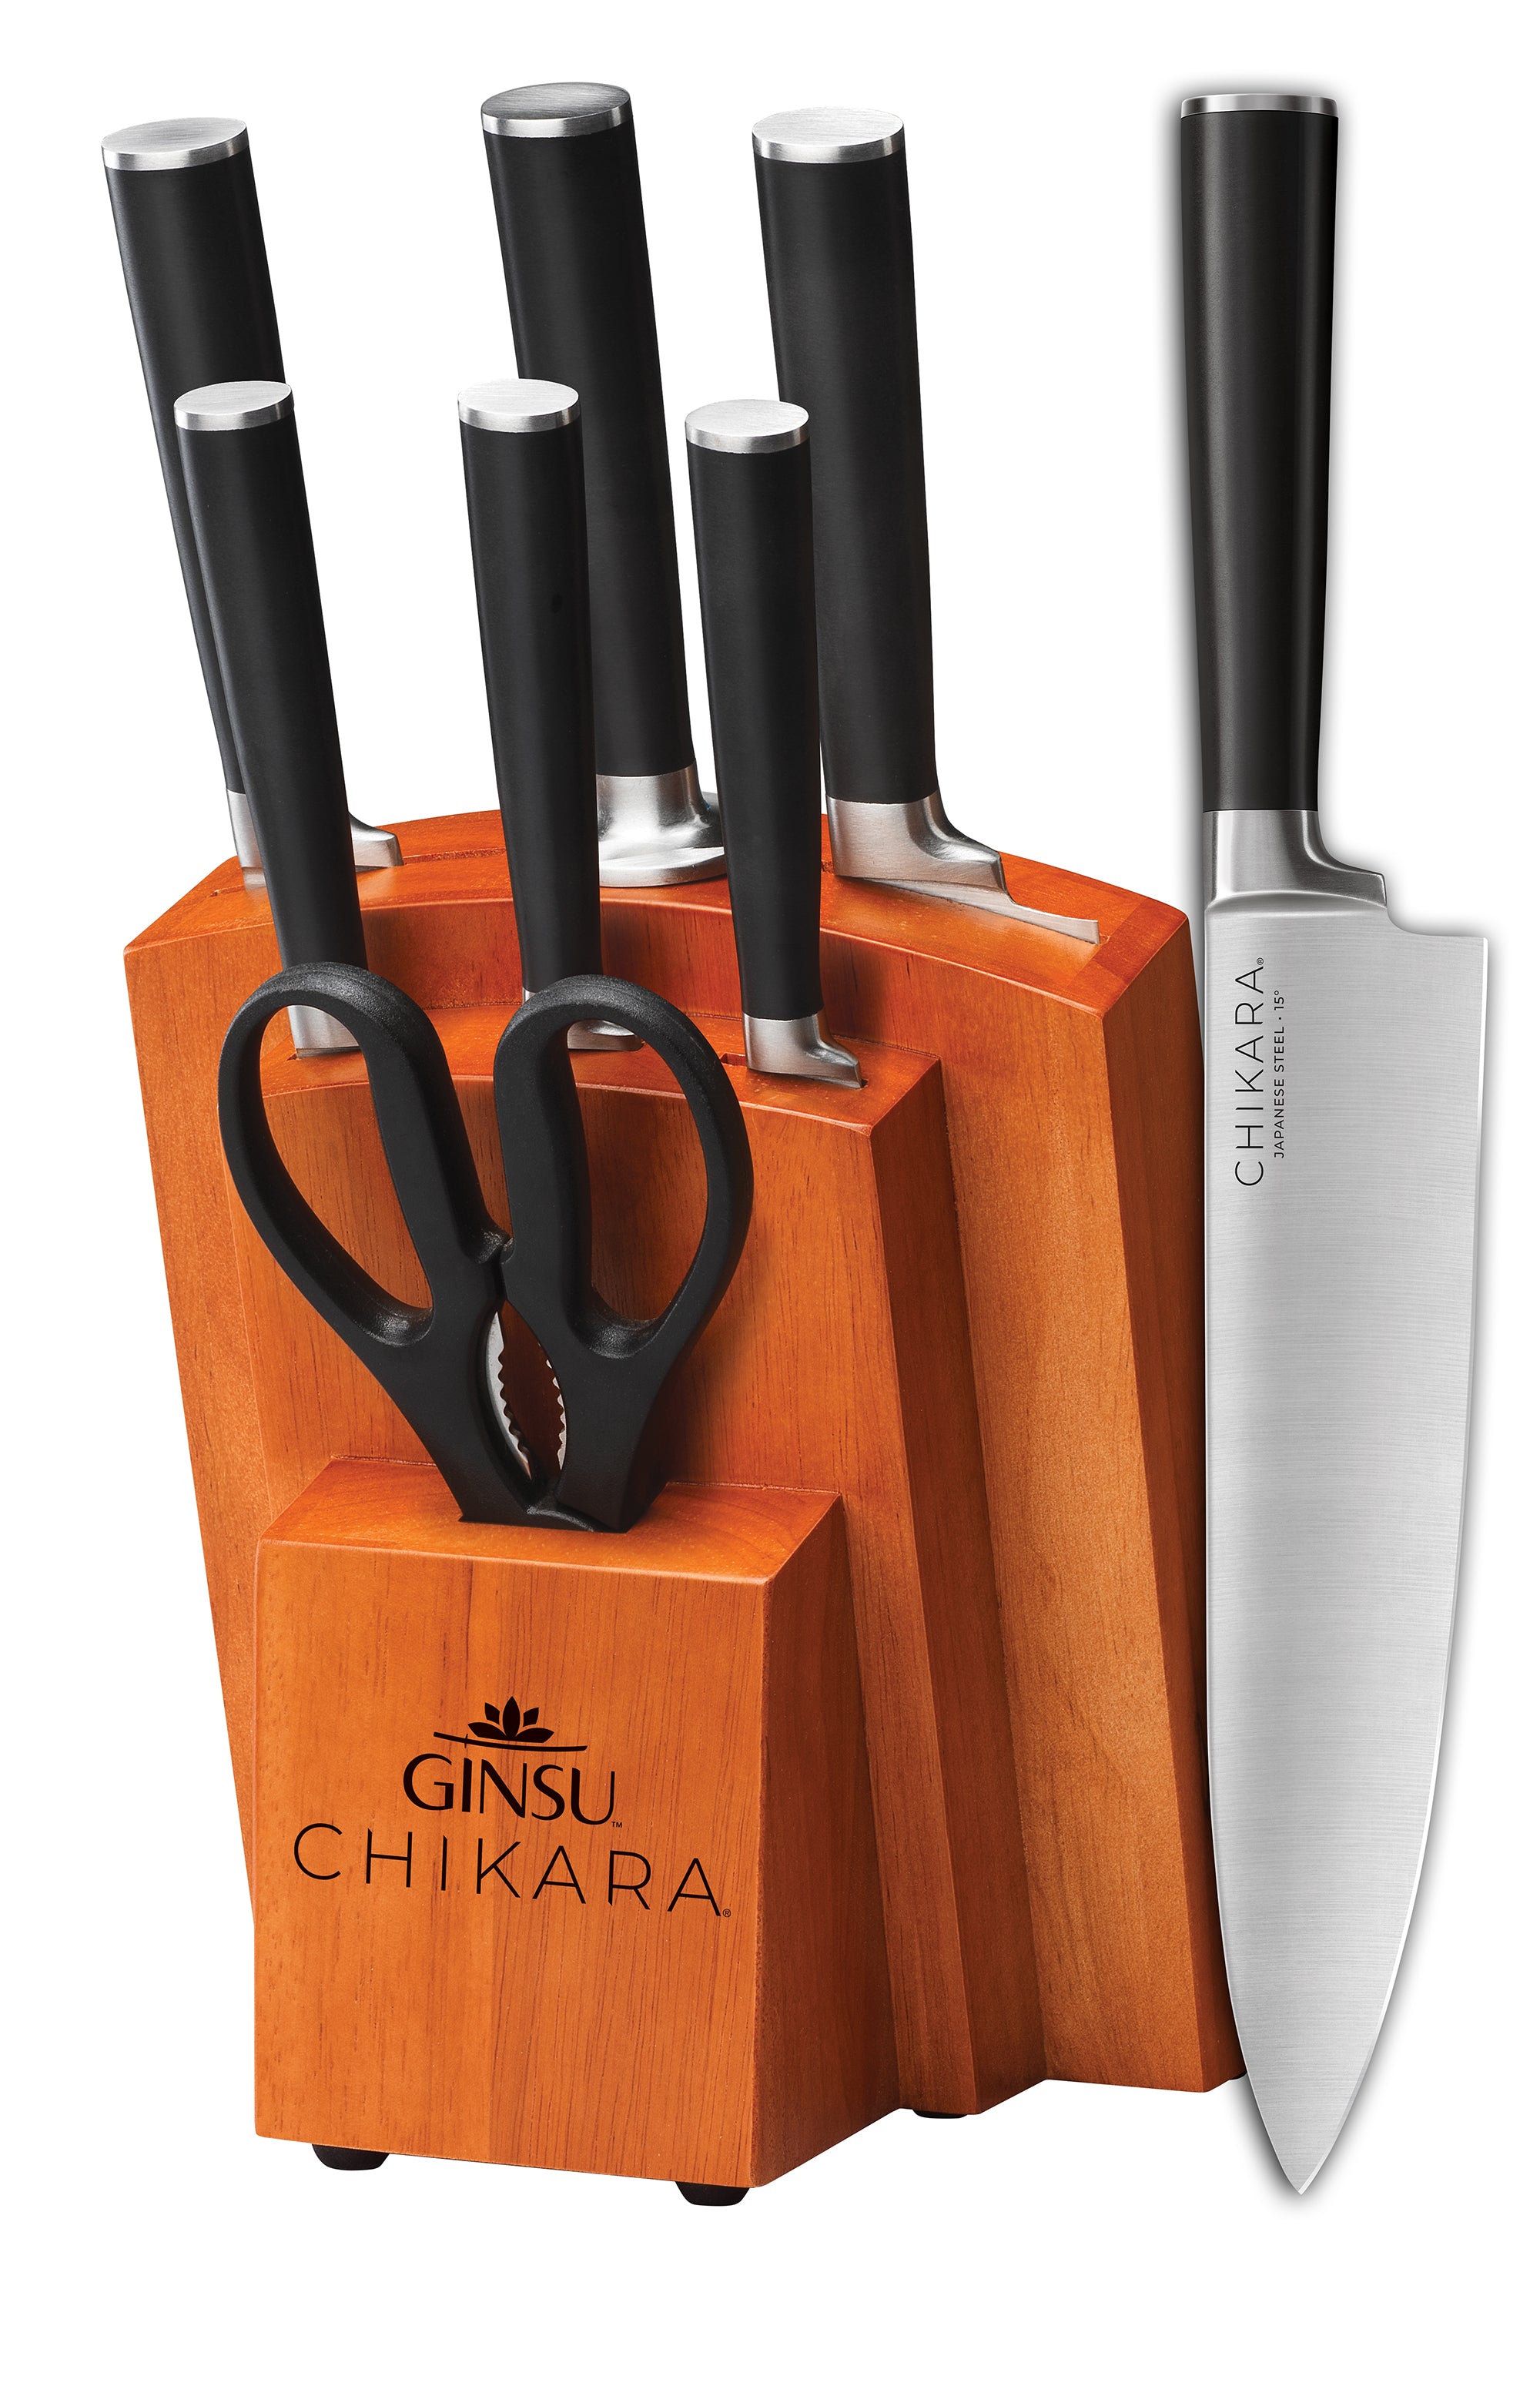 GINSU 8' ESSENTIAL SERIES CHEF KNIFE SUNSET YELLOW - NEVER DULL